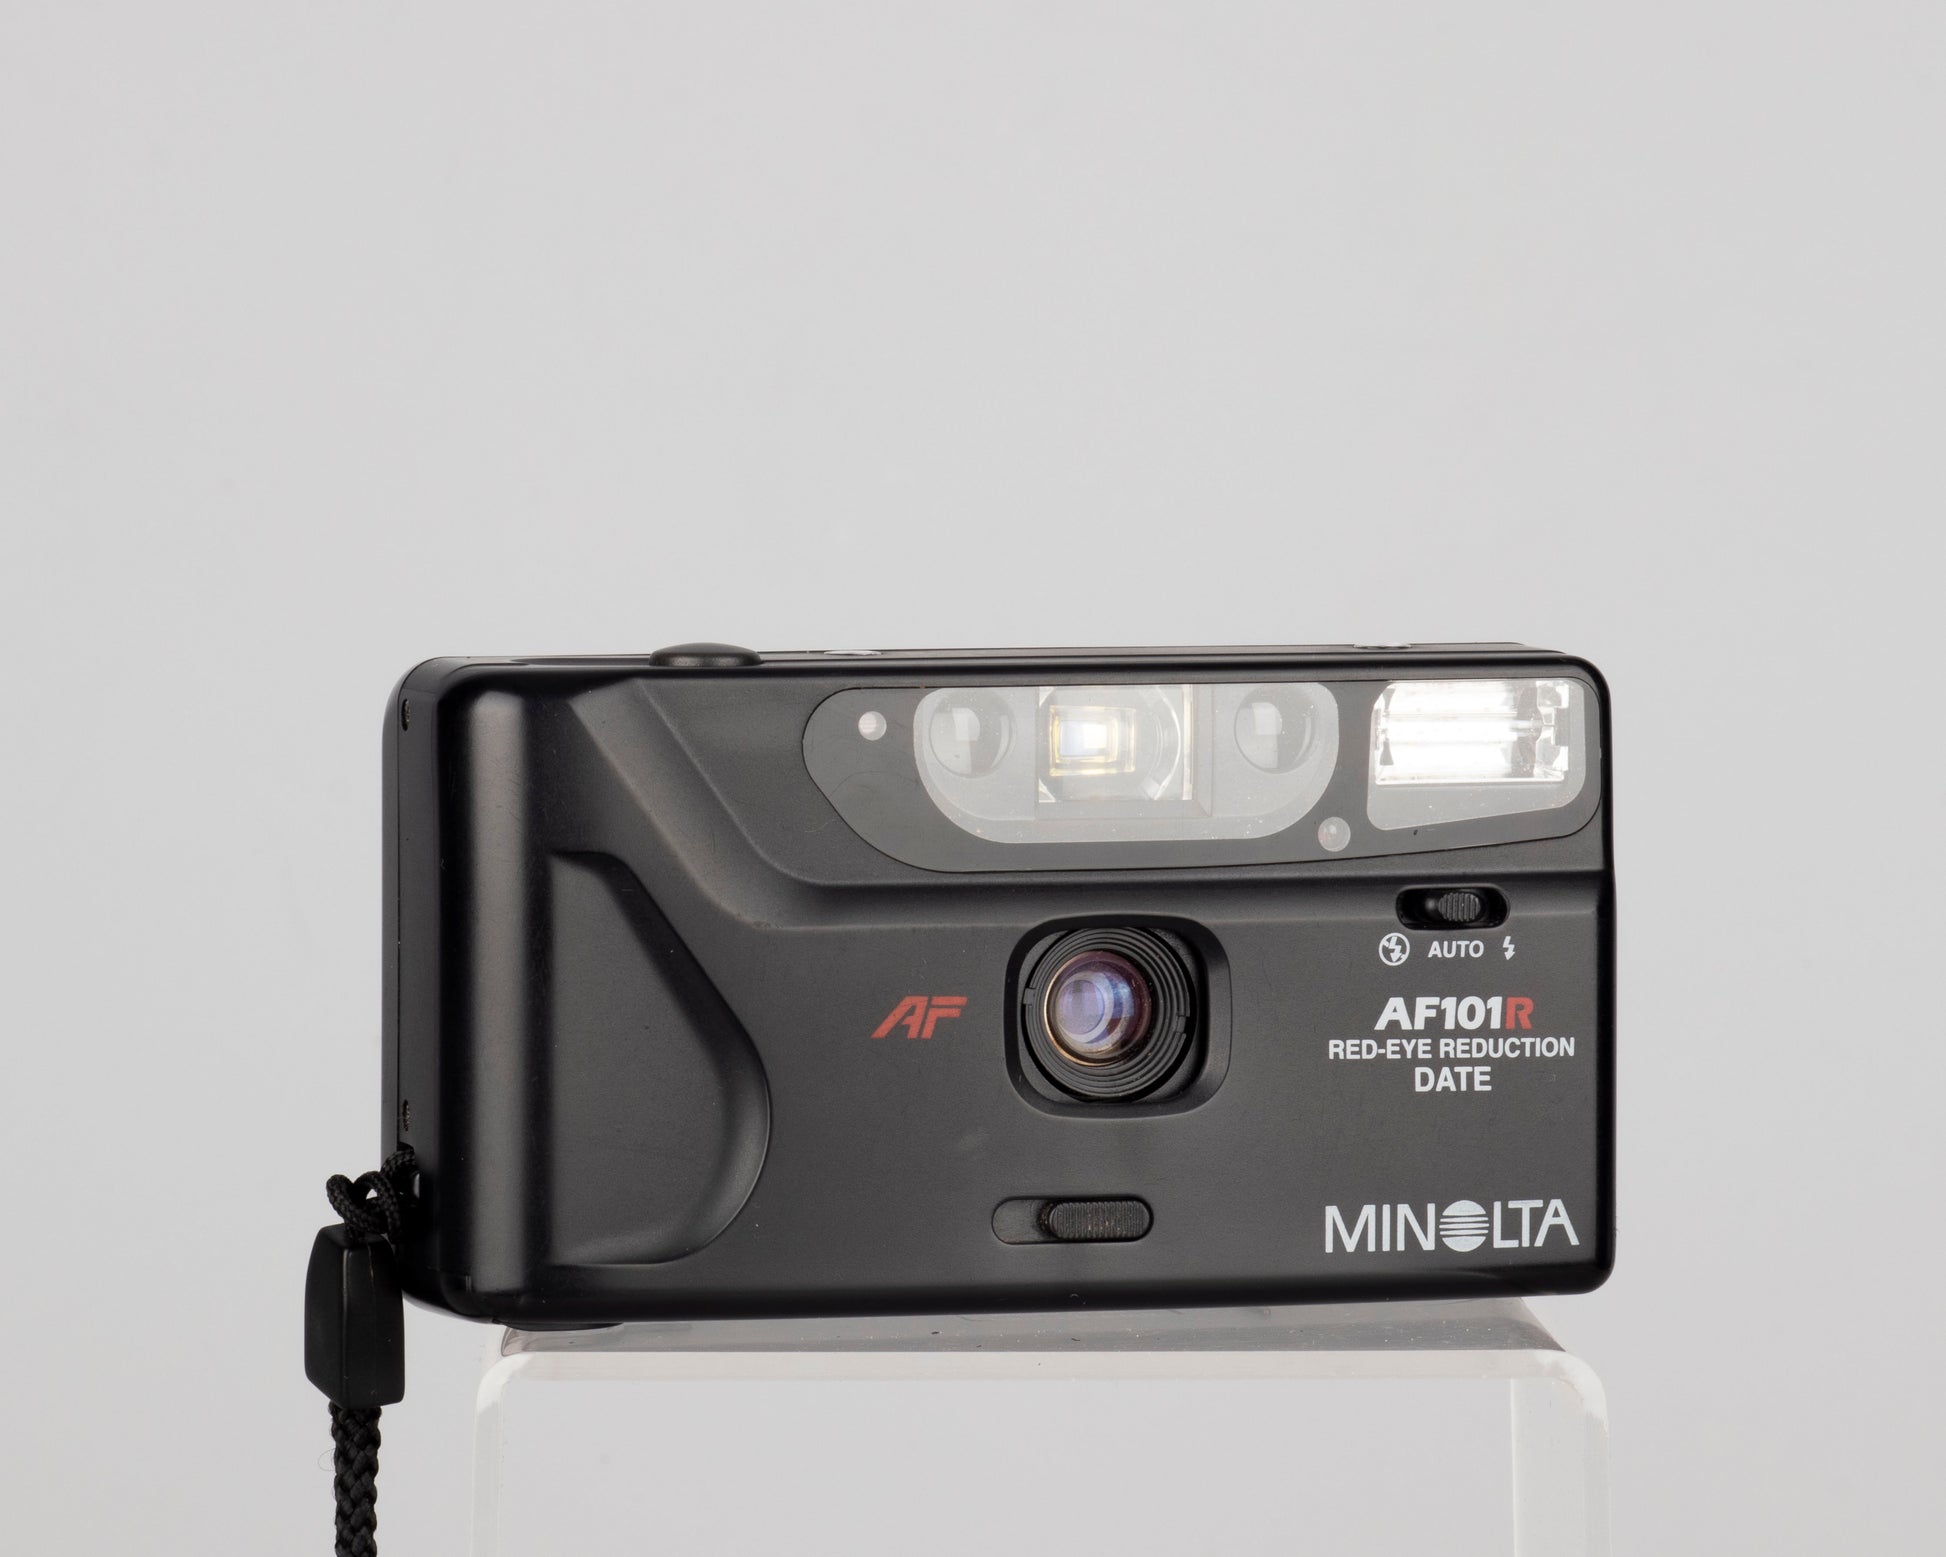 The Minolta AF101R is an ultra-compact 35mm point-and-shoot 